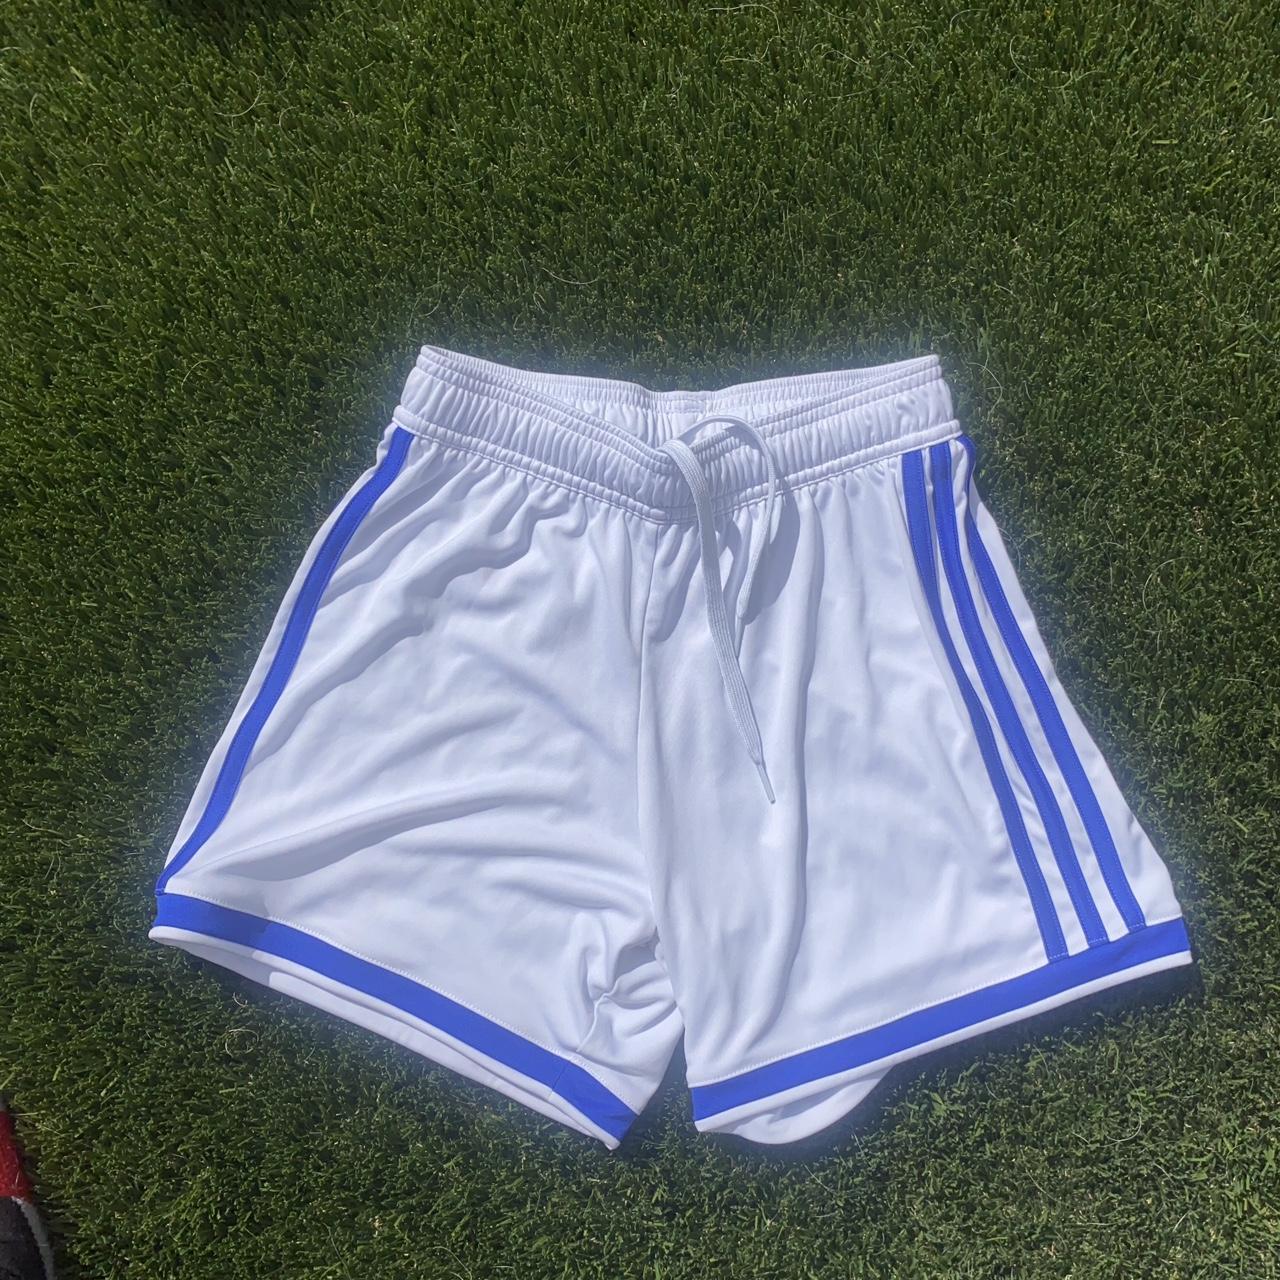 Adidas Women's White and Blue Shorts (2)